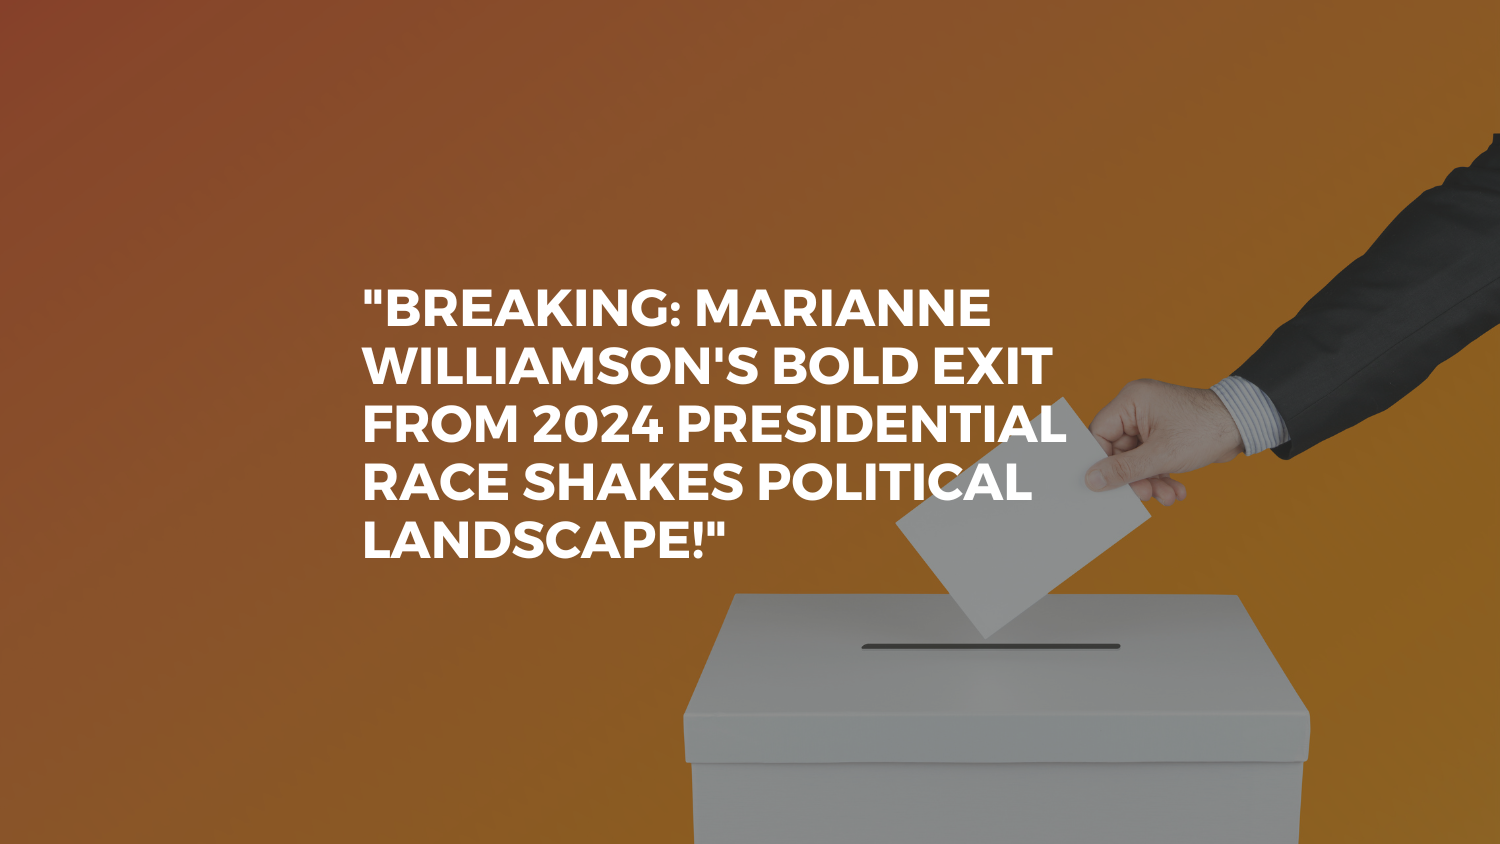 "Breaking: Marianne Williamson's Bold Exit from 2024 Presidential Race Shakes Political Landscape!"